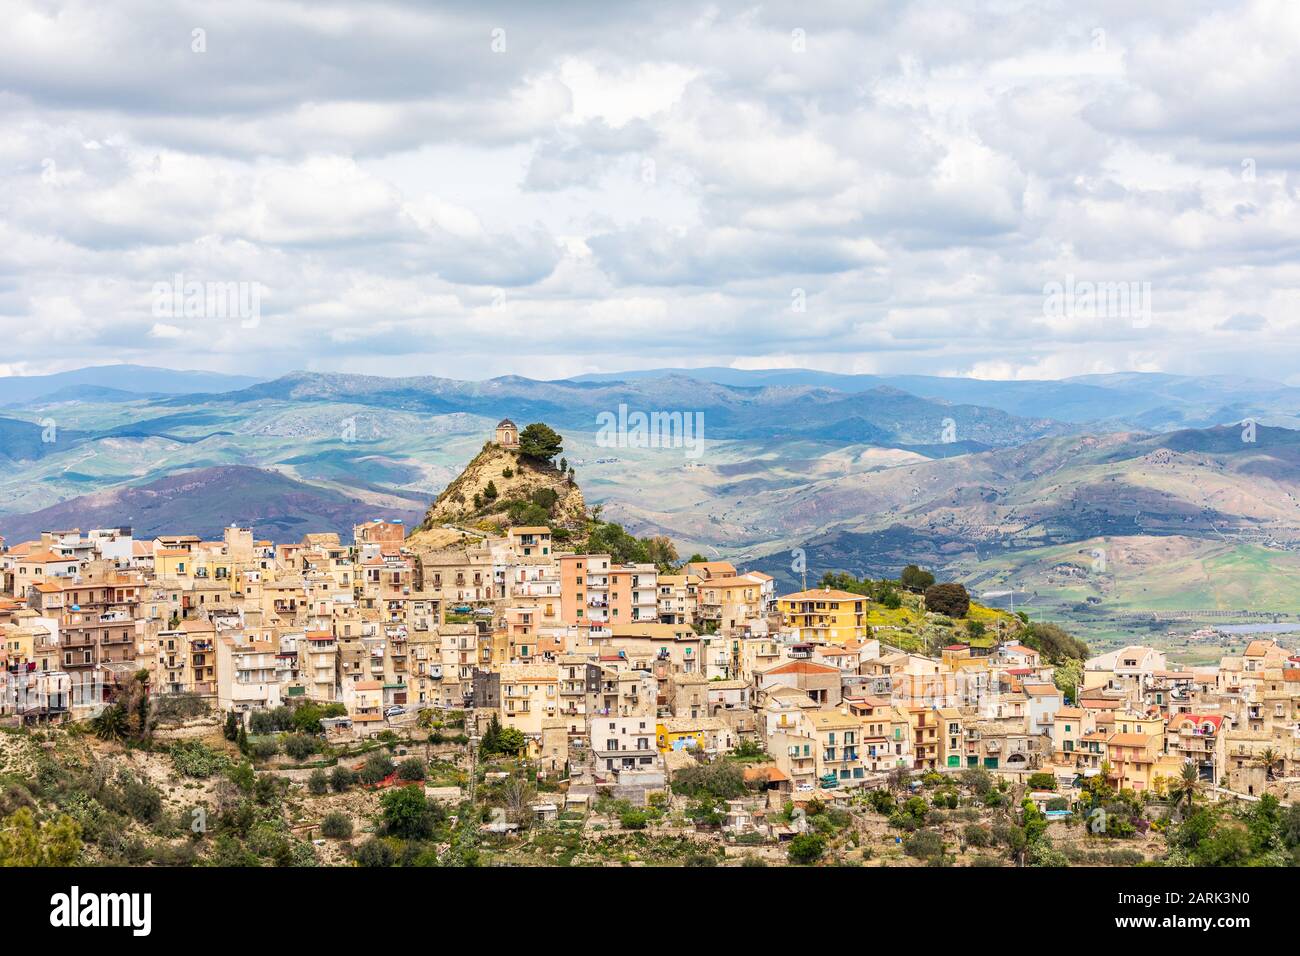 Italy, Sicily, Enna Province, Centuripe.  The ancient town of Centuripe in eastern Sicily. The town is pre-Roman, dating back to the 5th century BC. Stock Photo